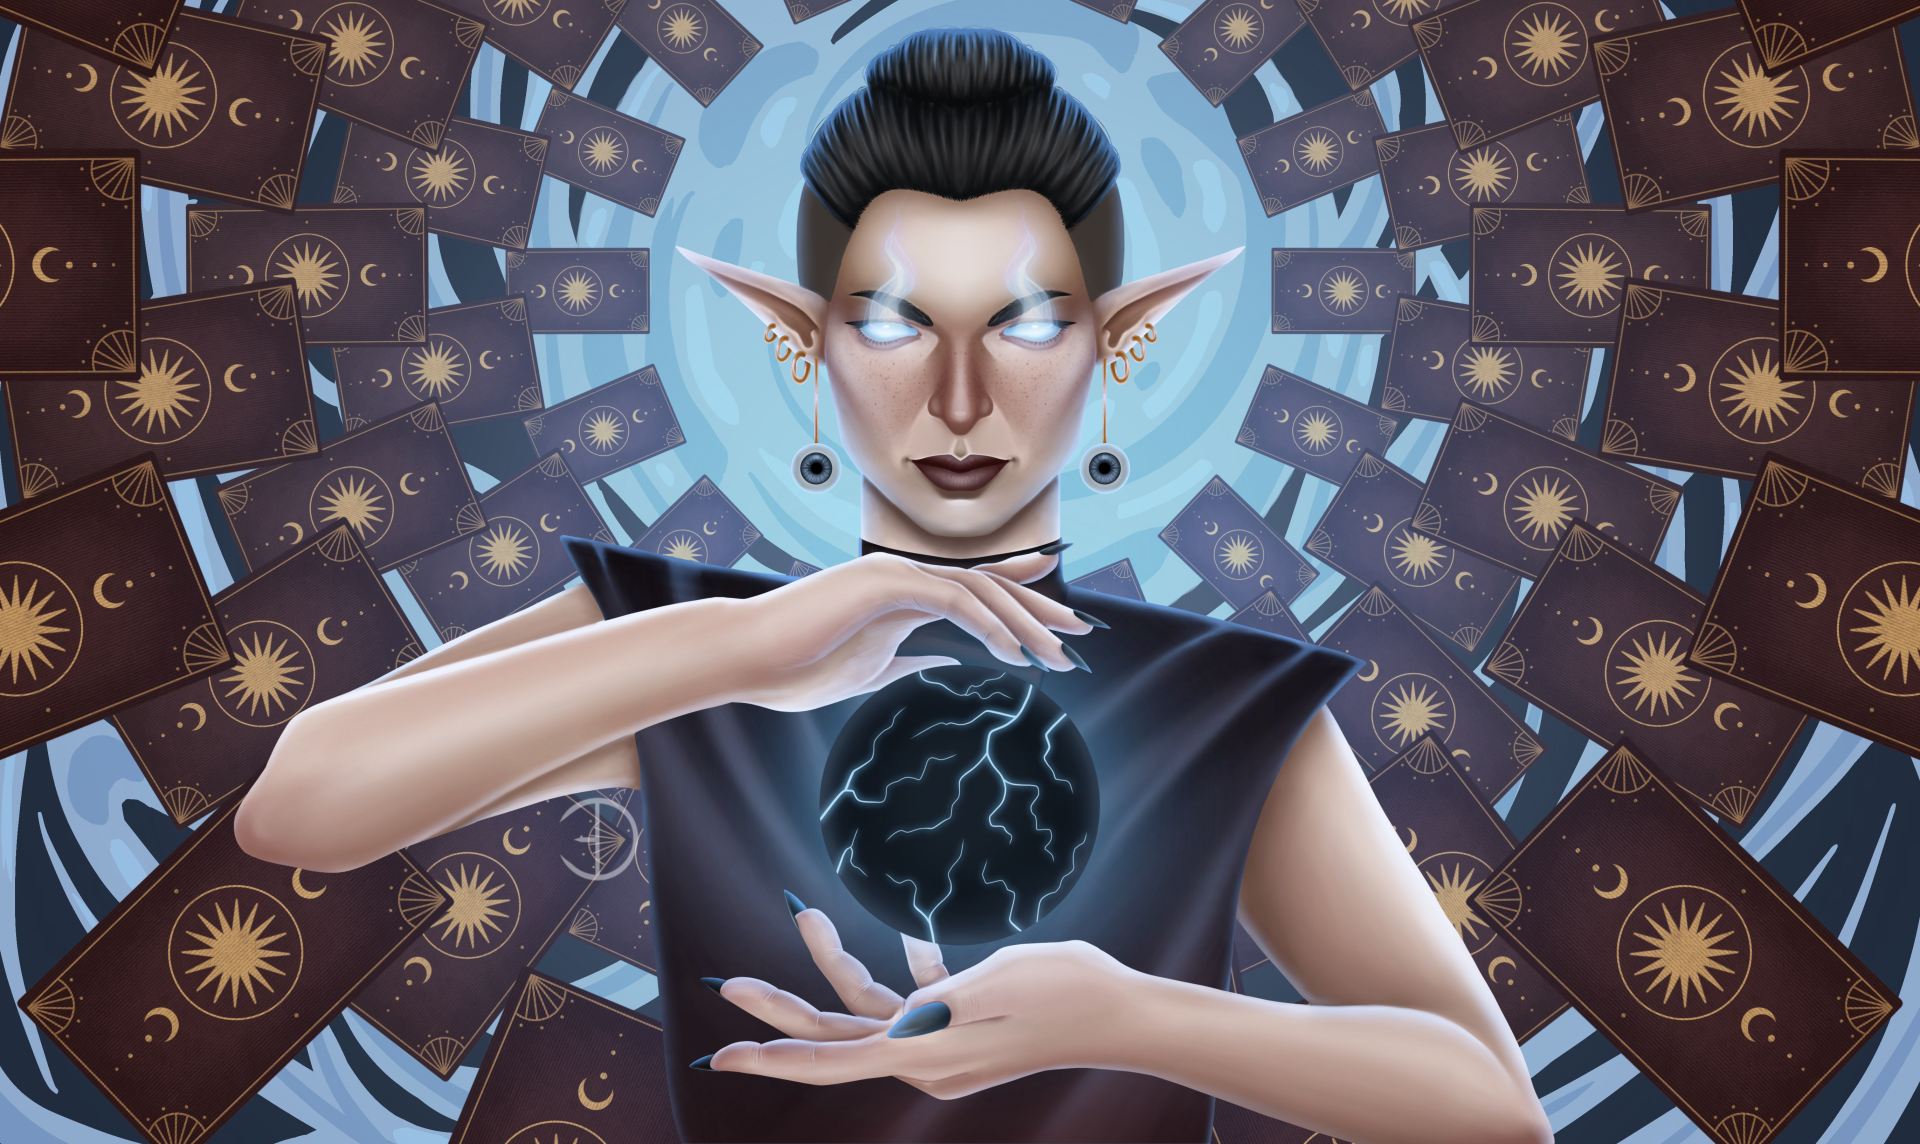 An illustration of an elf holding a glowing orb, with tarot cards floating around her.